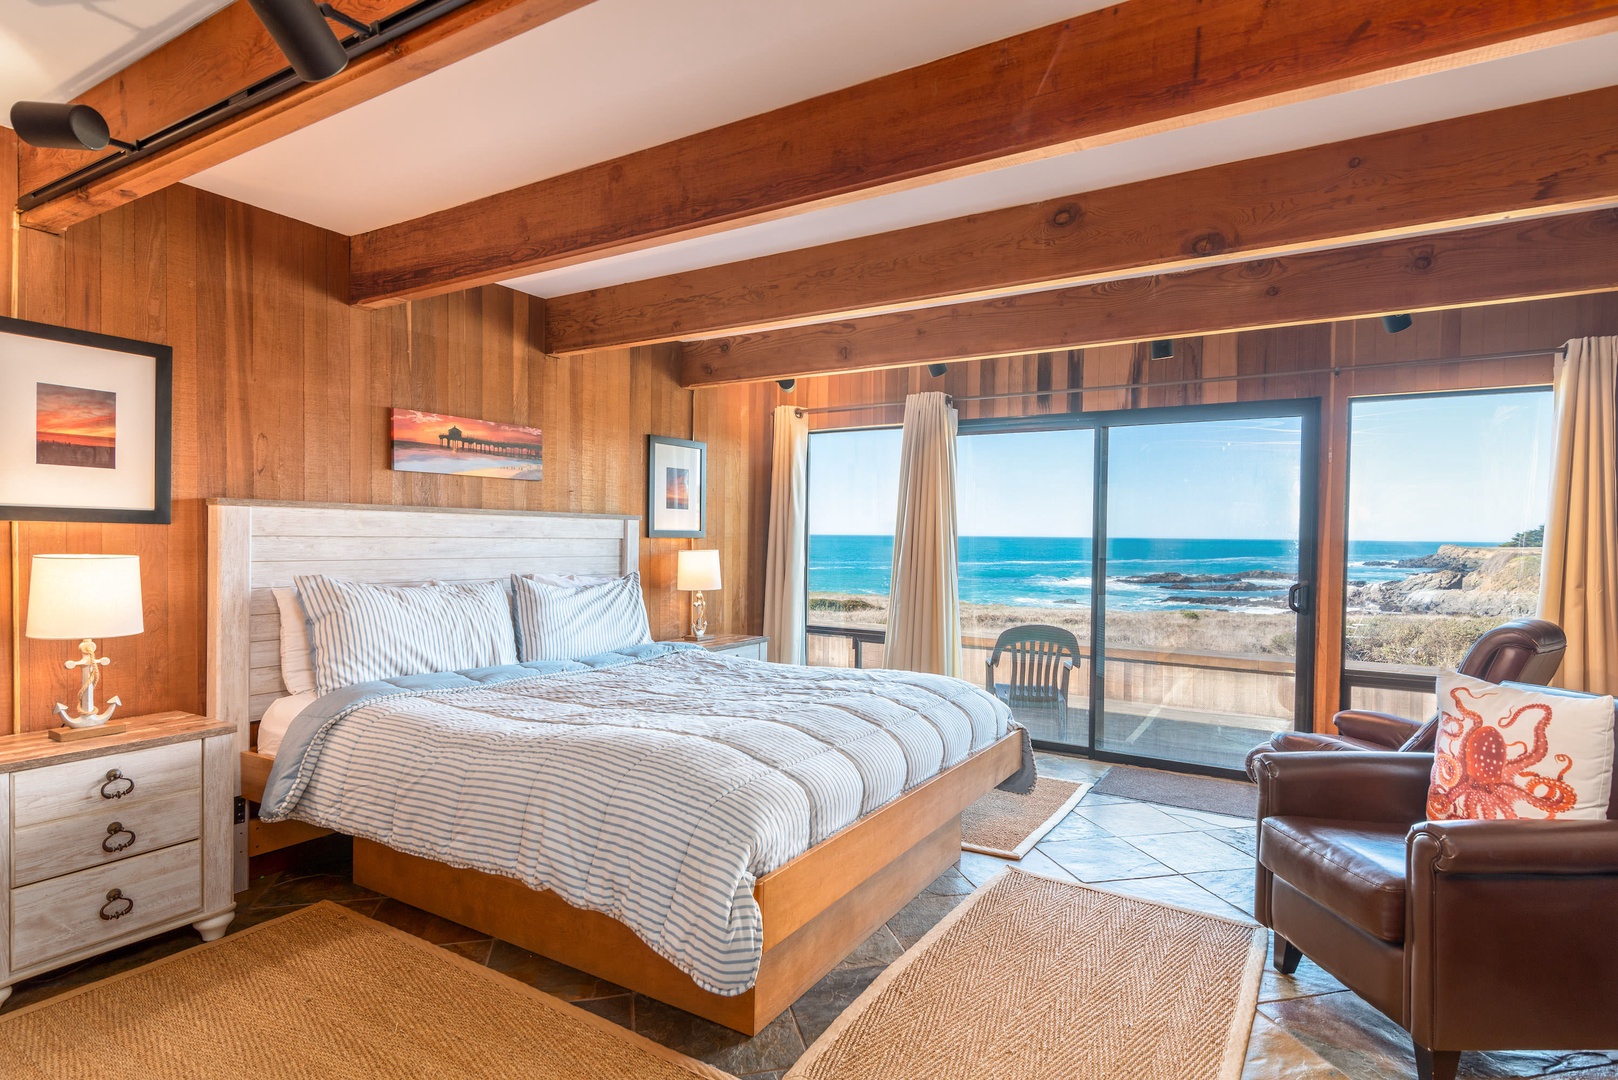 Master bedroom: King bed with ocean view and deck access